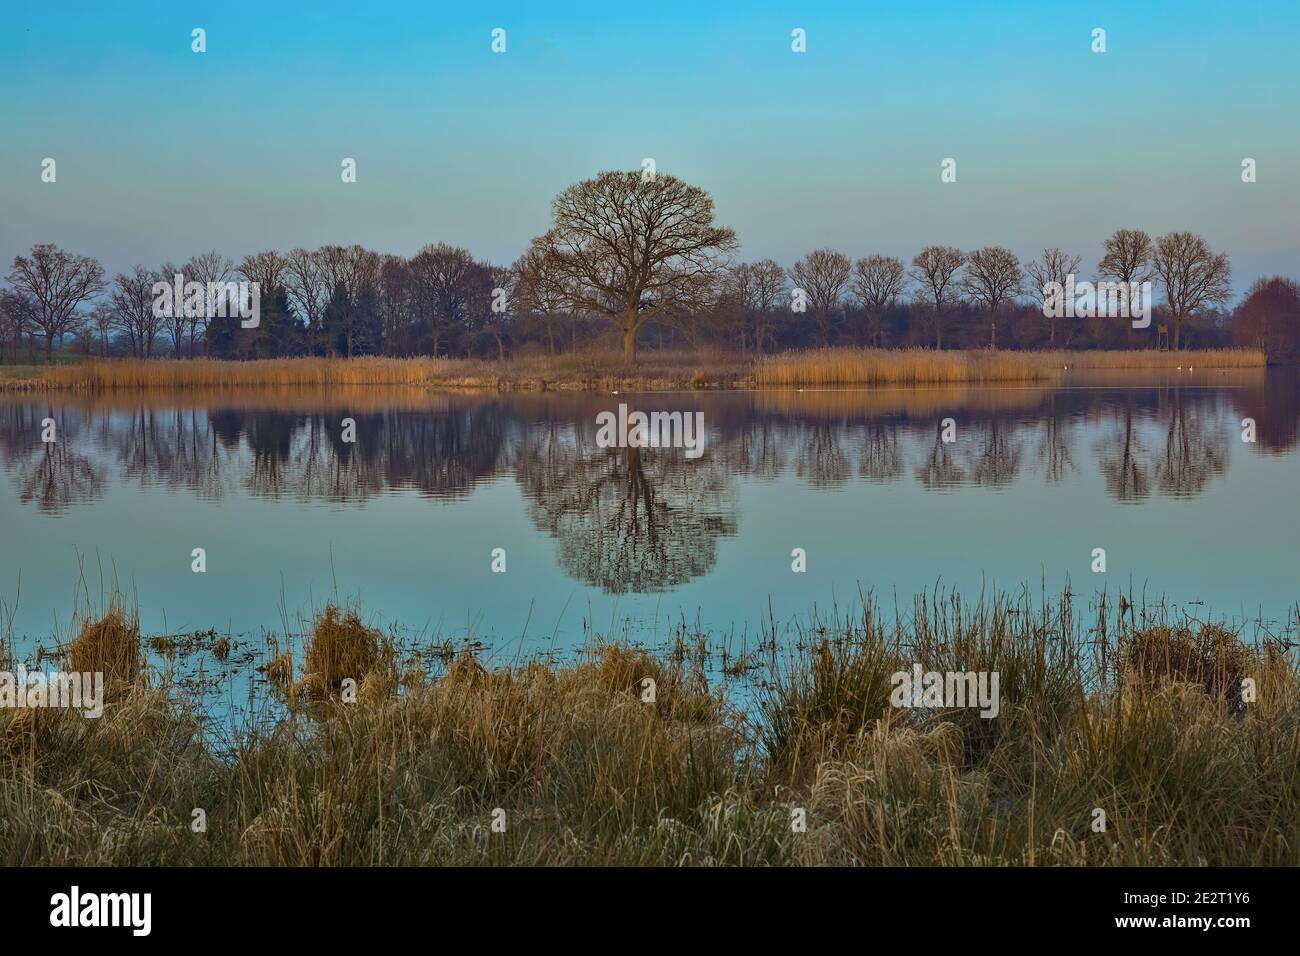 Many trees were reflected in the small lake near Malente (Germany) because there was no wind. Stock Photo